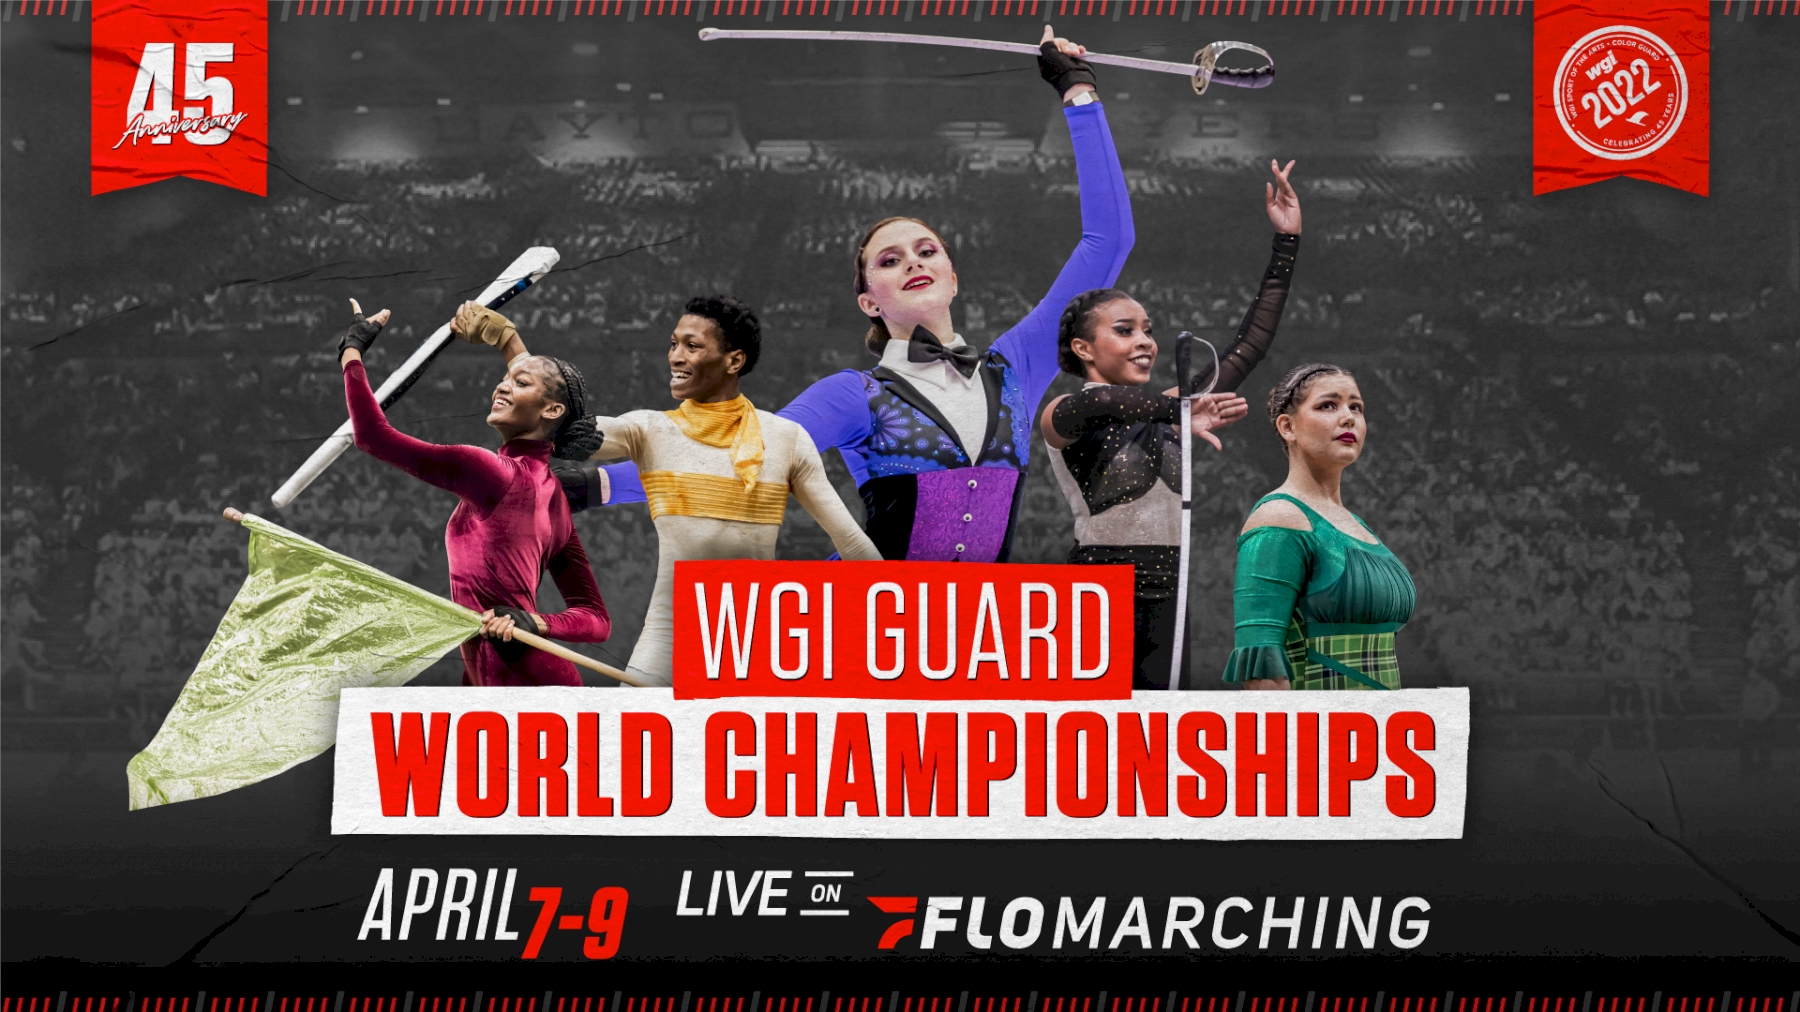 2022 WGI Guard World Championships Marching Arts Event FloMarching